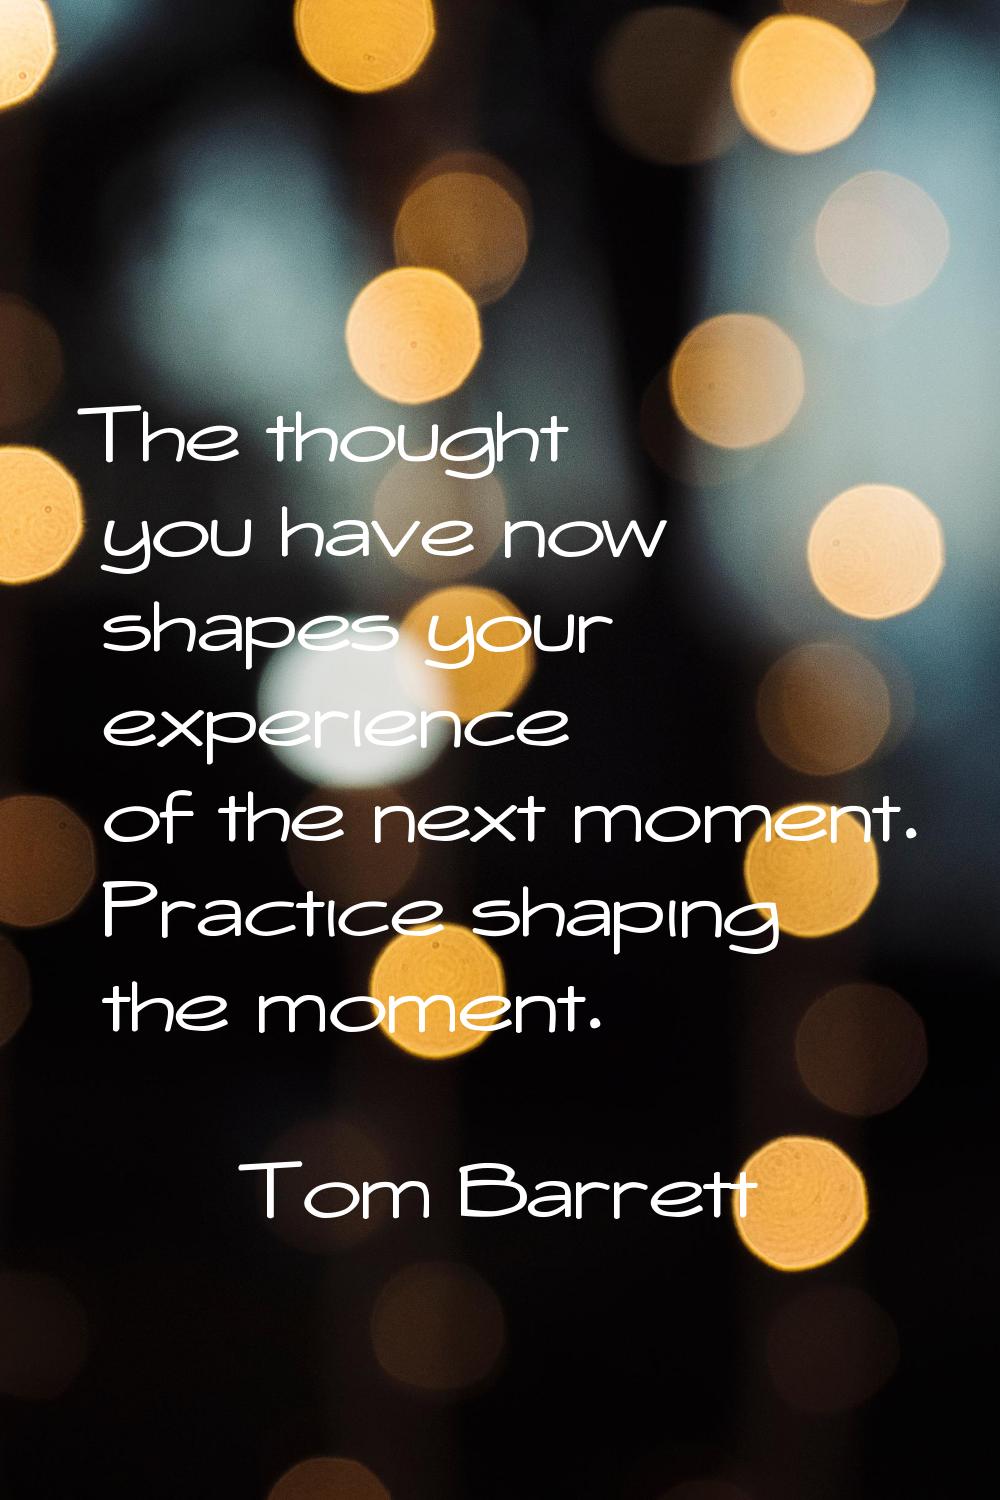 The thought you have now shapes your experience of the next moment. Practice shaping the moment.